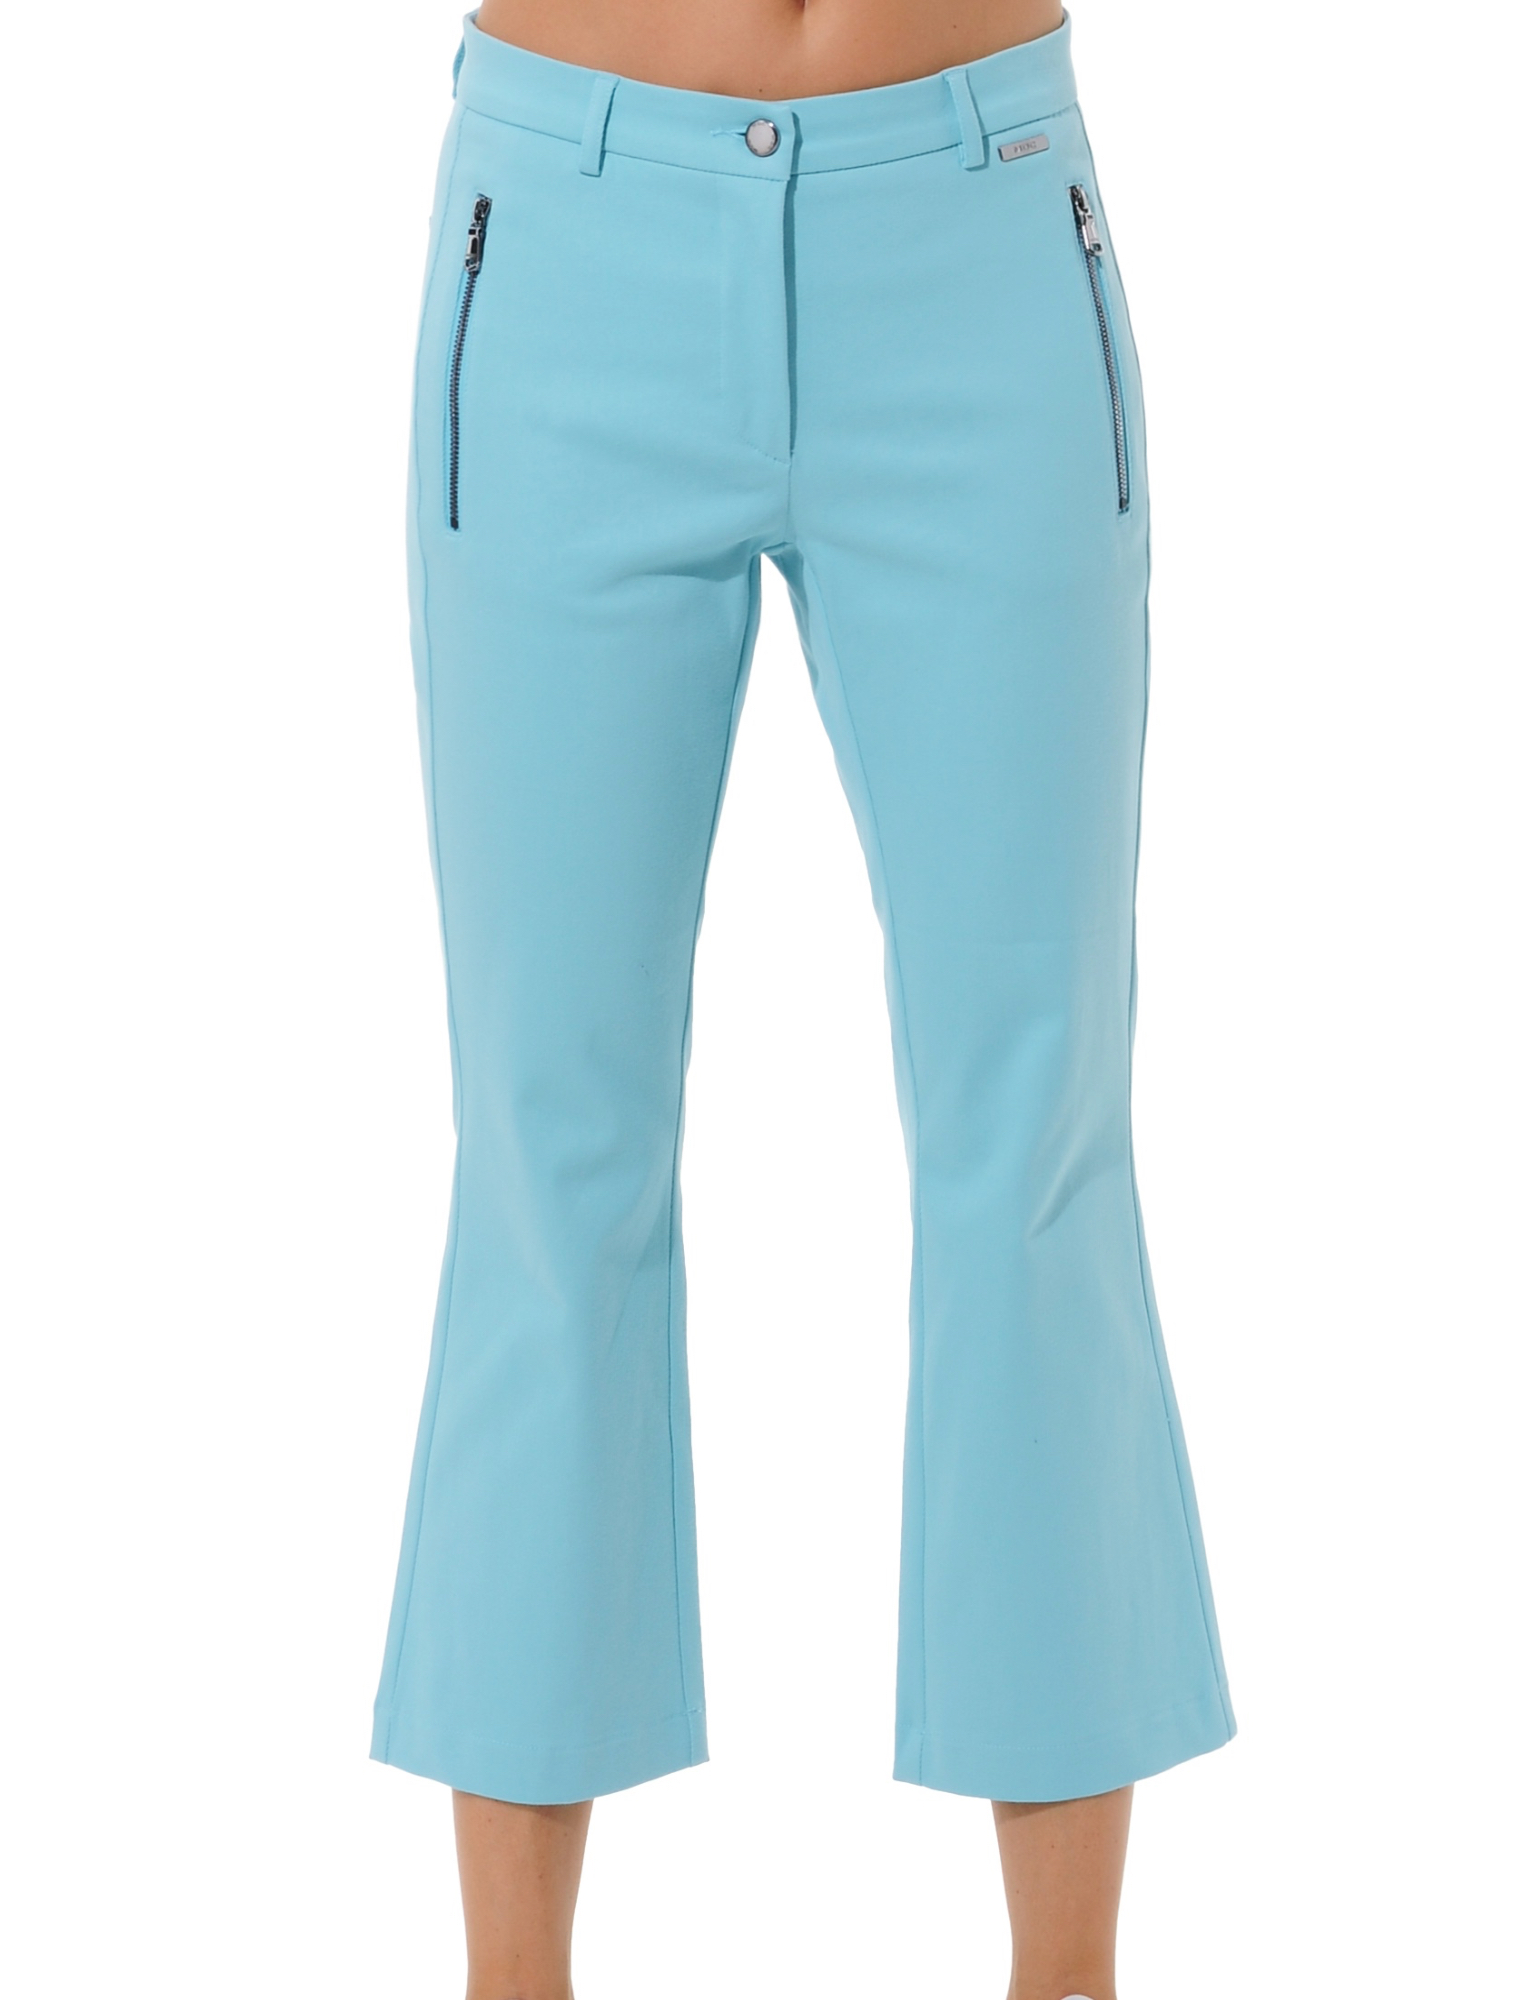 4way stretch boot cut cropped chinos sea